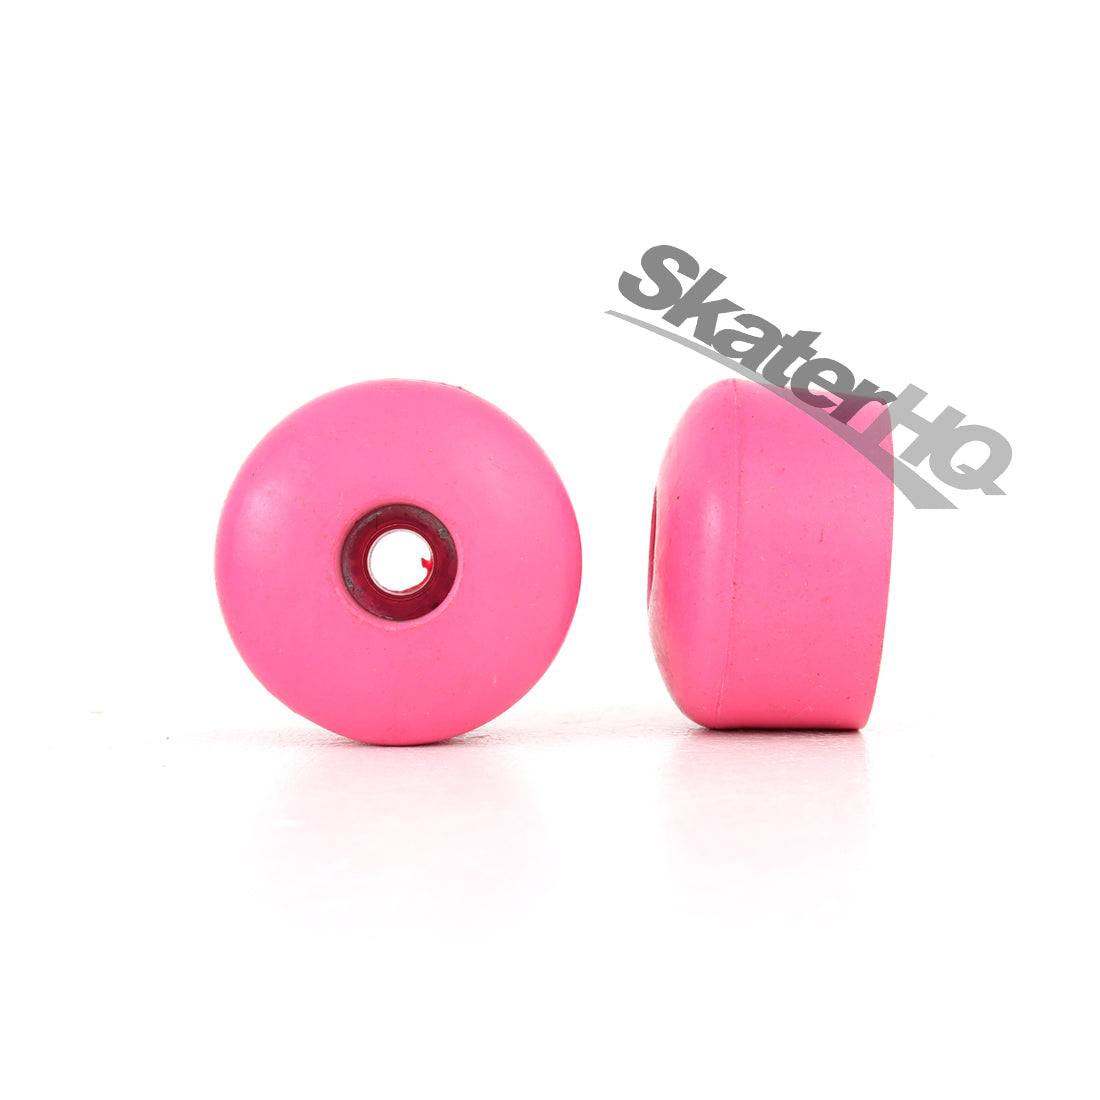 Sure-Grip Dance Toe Stops Small PAIR - Pink Roller Skate Hardware and Parts